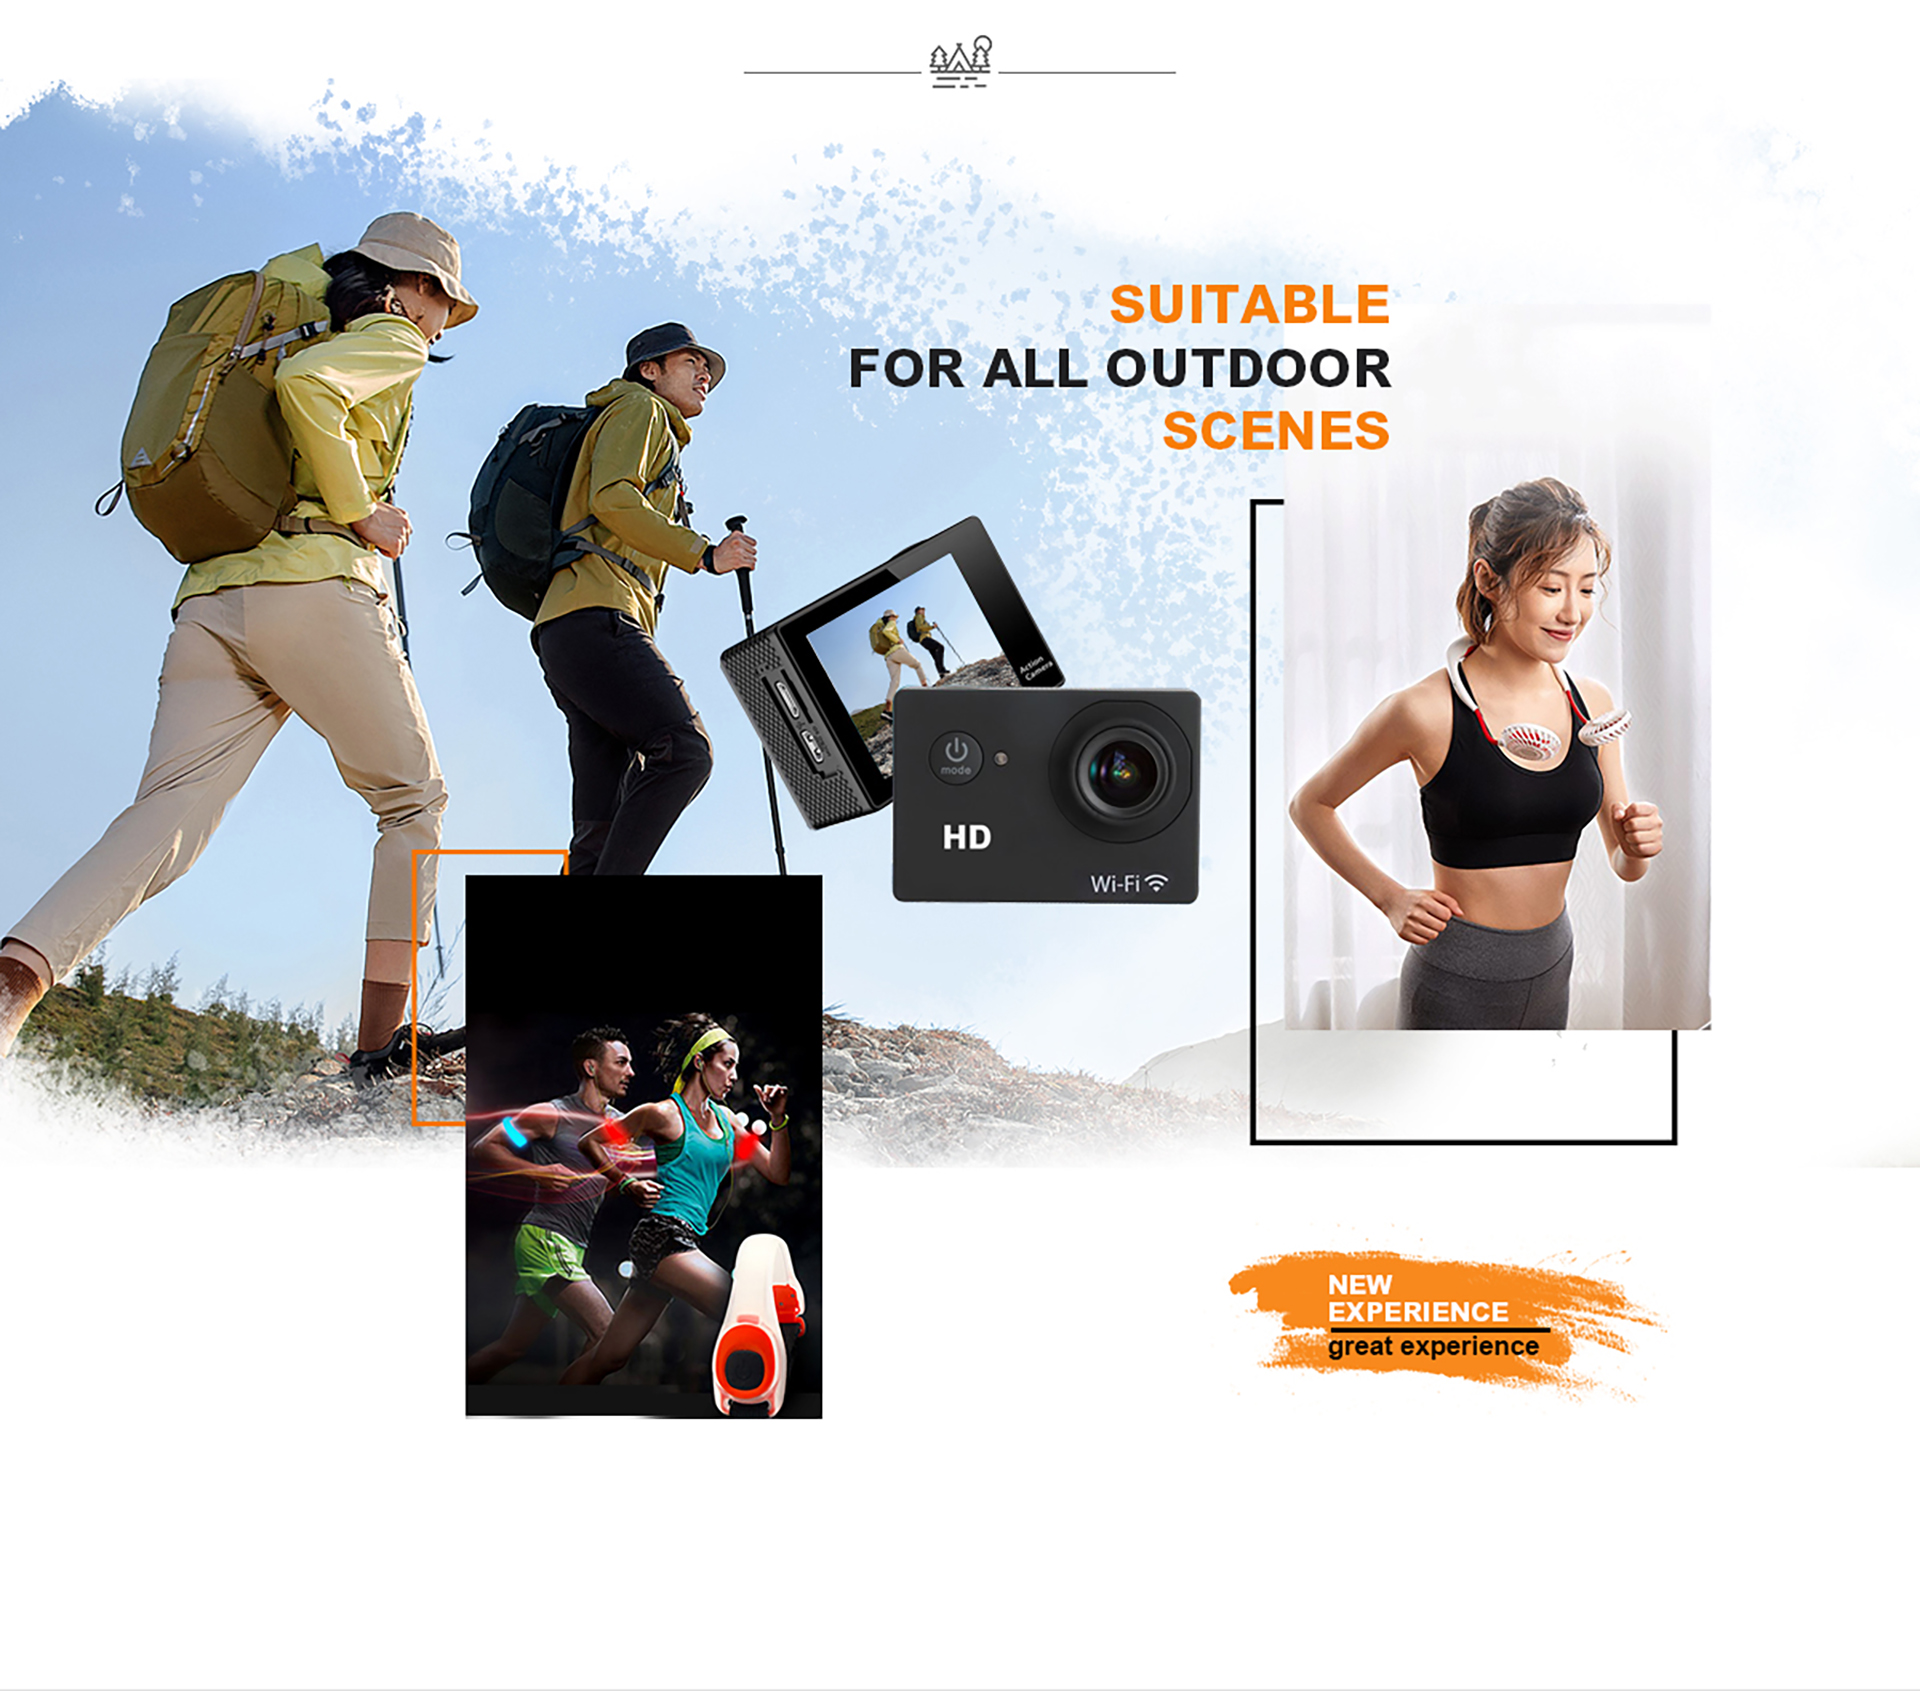 camera shooting while hiking, LED light armband for night running, neckband fan to cool while exercising